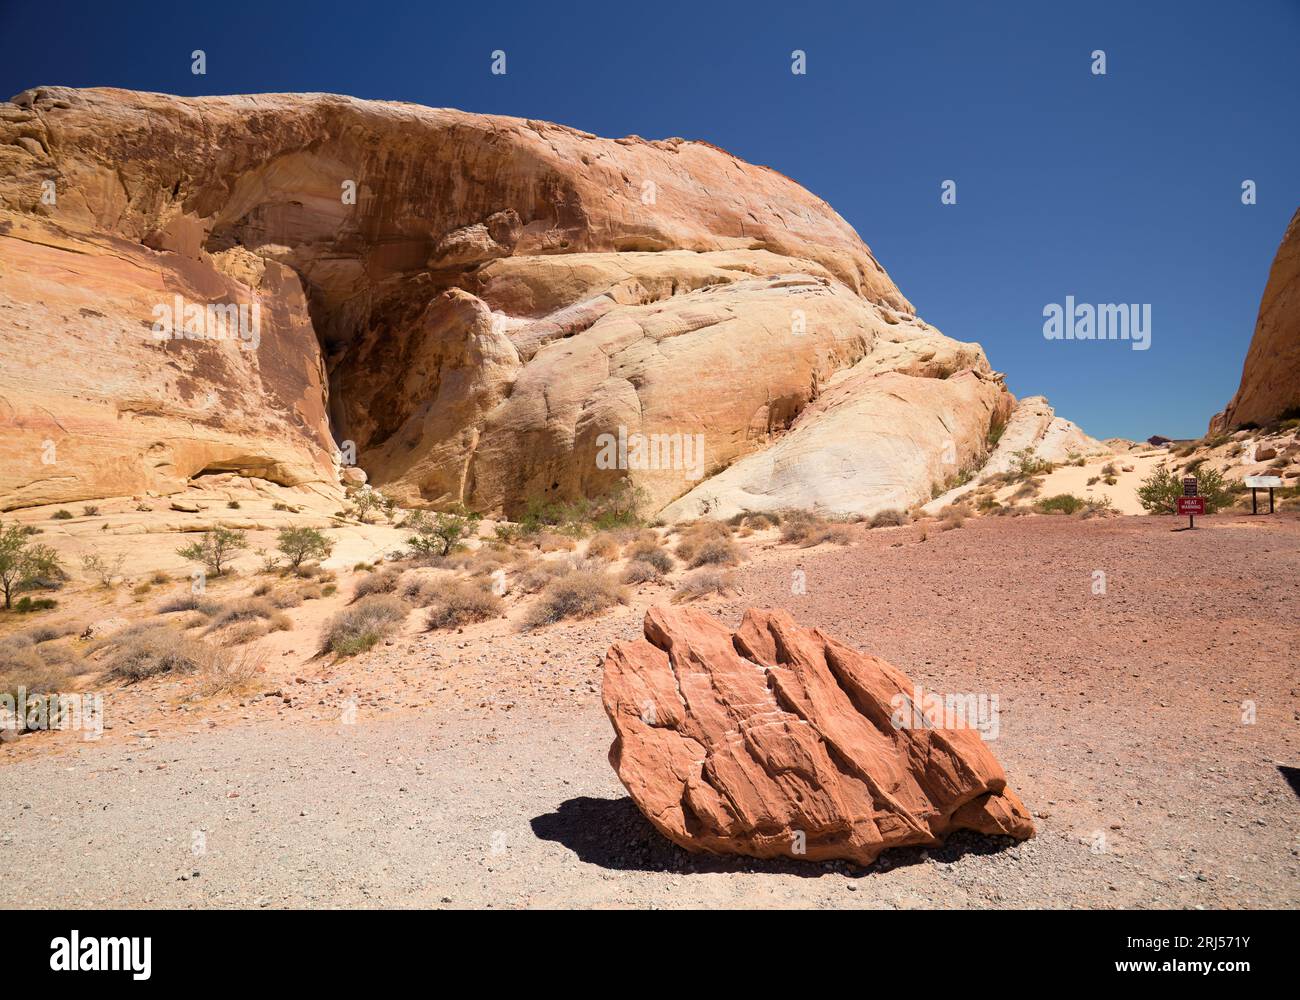 Am White Domes Trail, Valley of Fire State Park, Nevada, USA Stockfoto